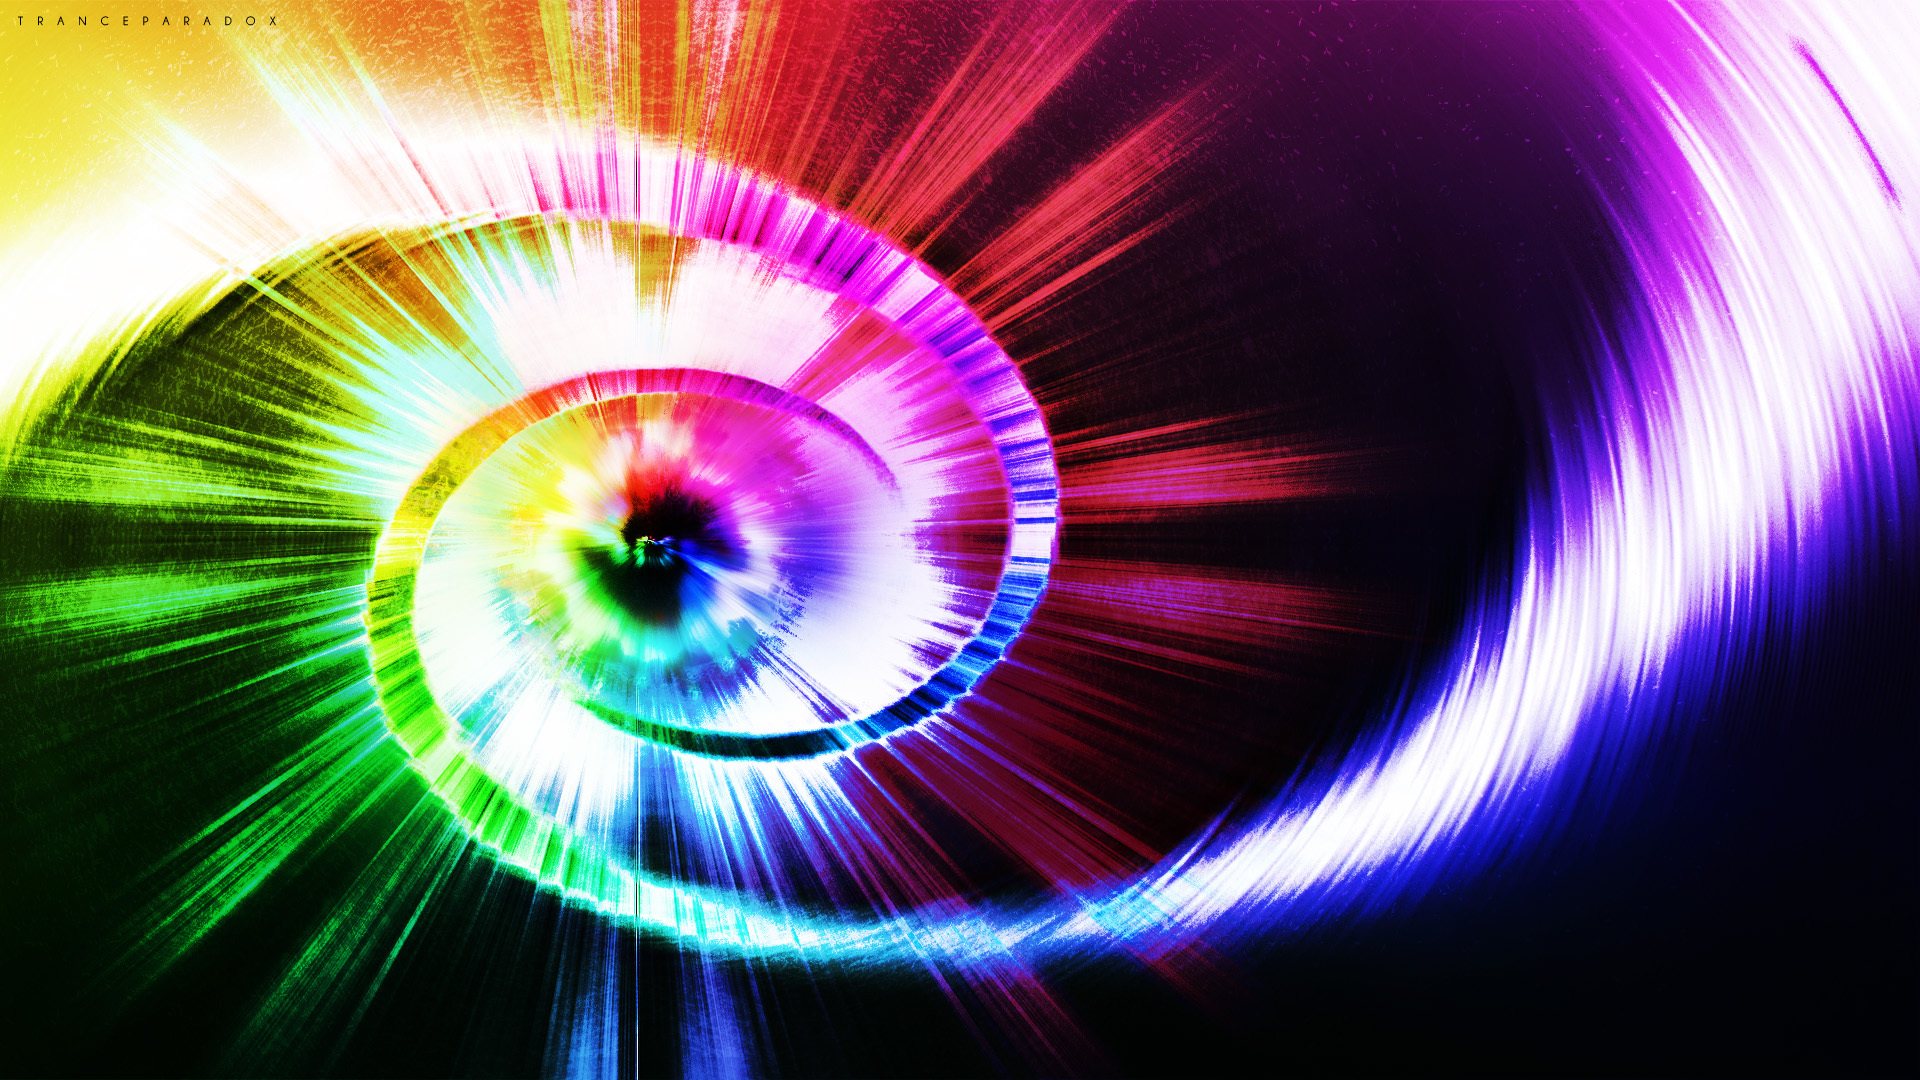 Spiral and multi-colored rays wallpapers and images - wallpapers ...